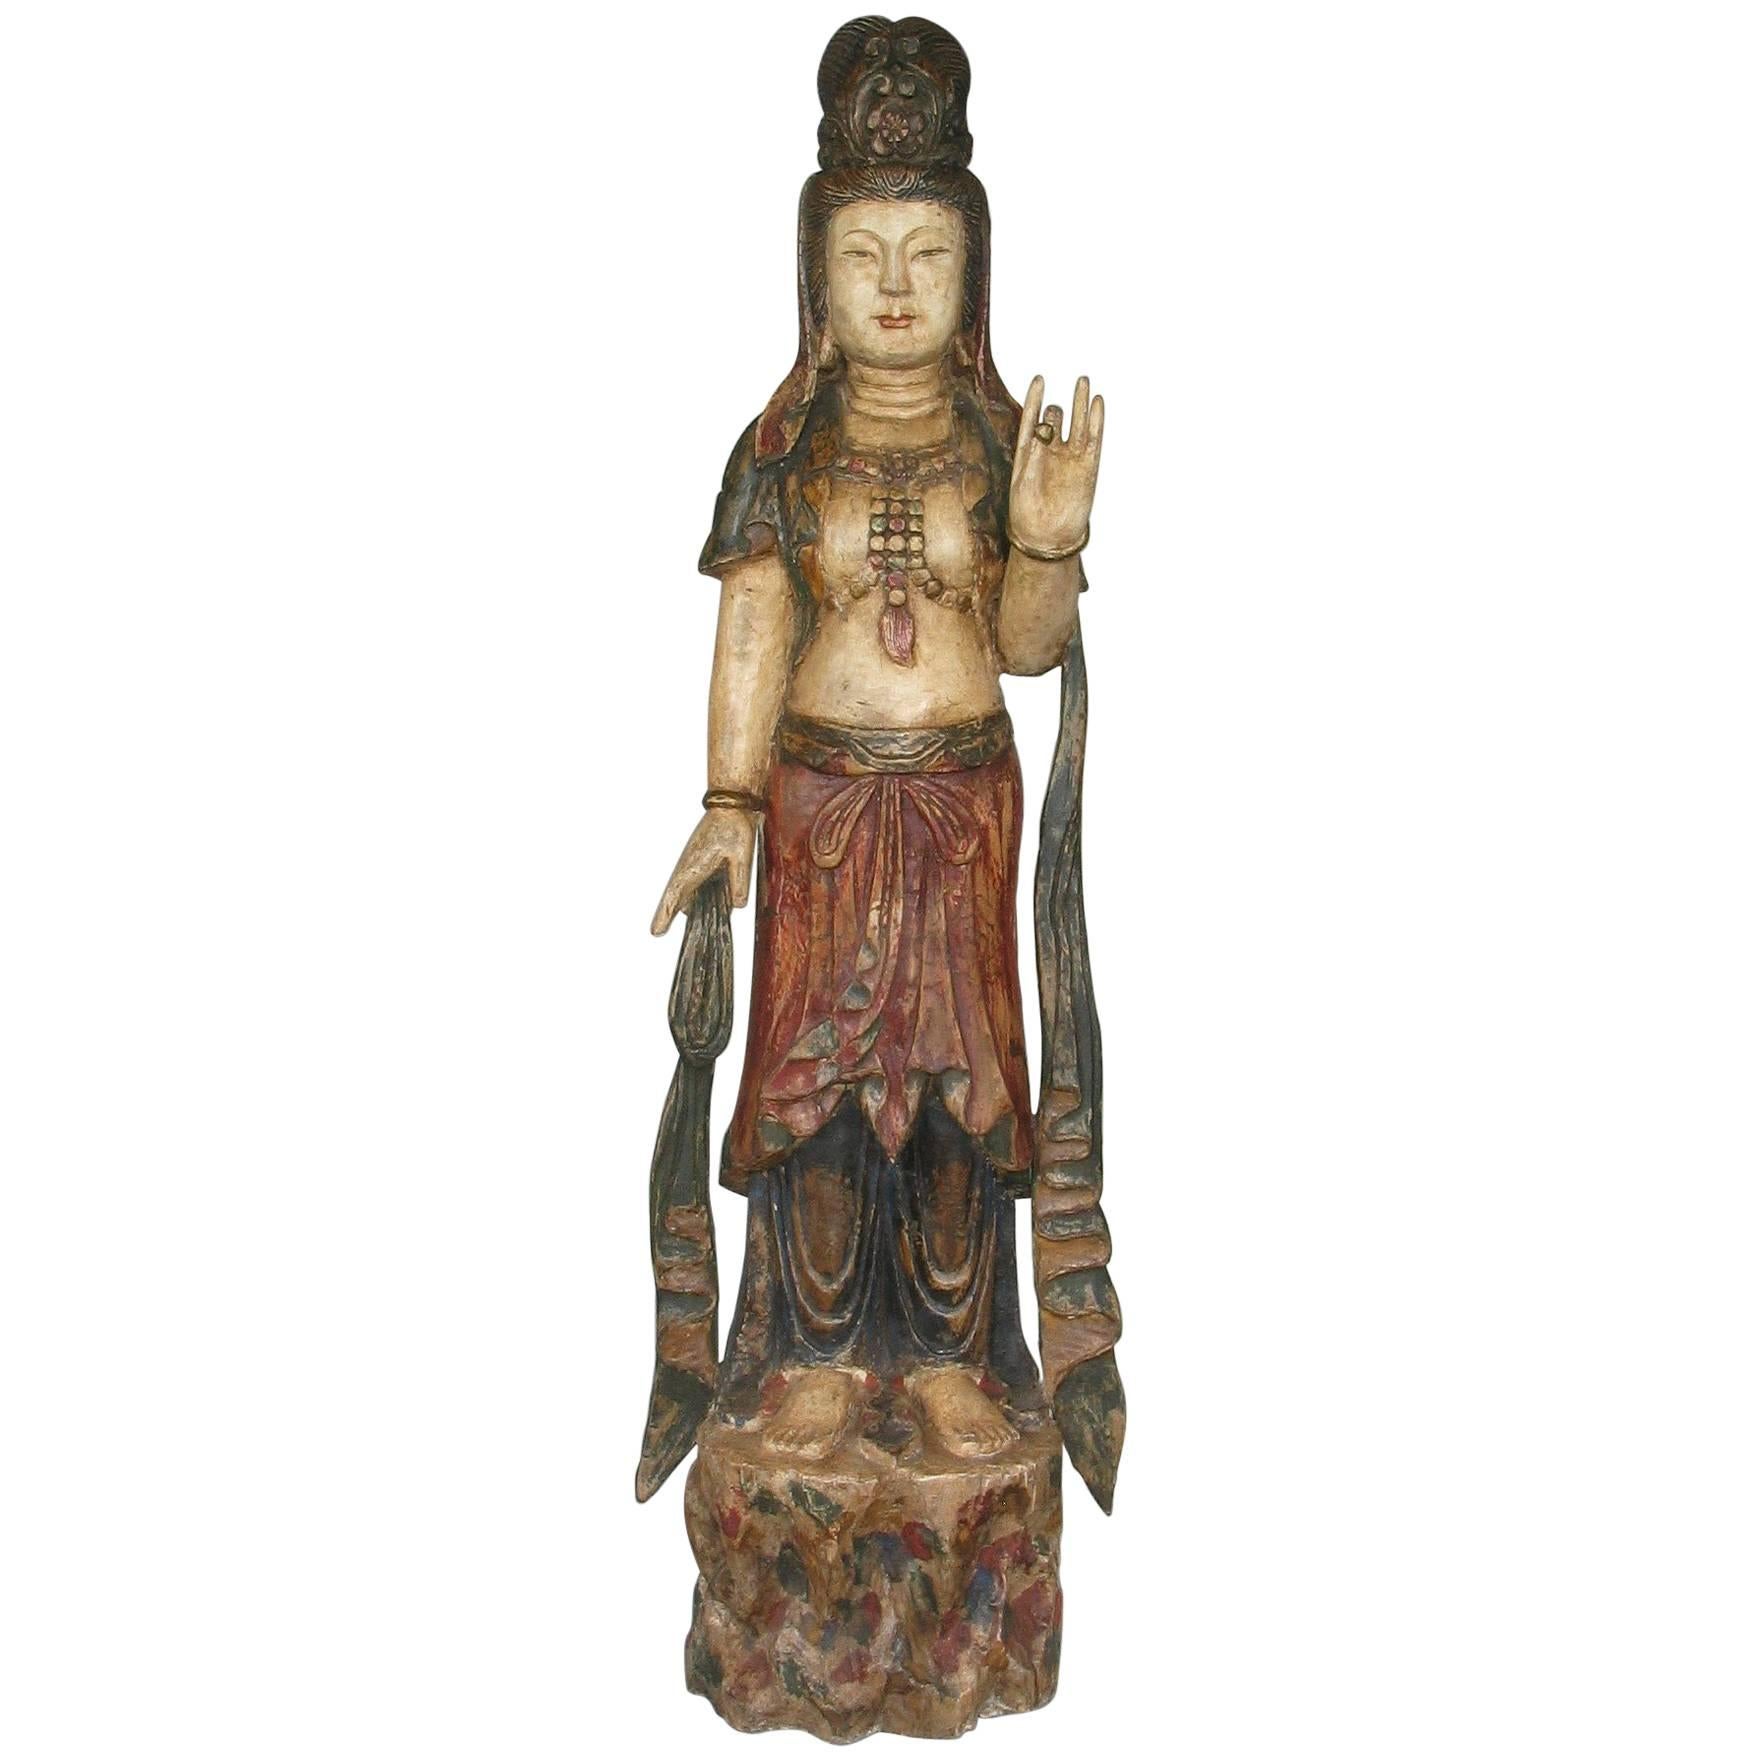 Chinese Carved Wood Standing Figure of Guanyin in the Ming Dynasty Style